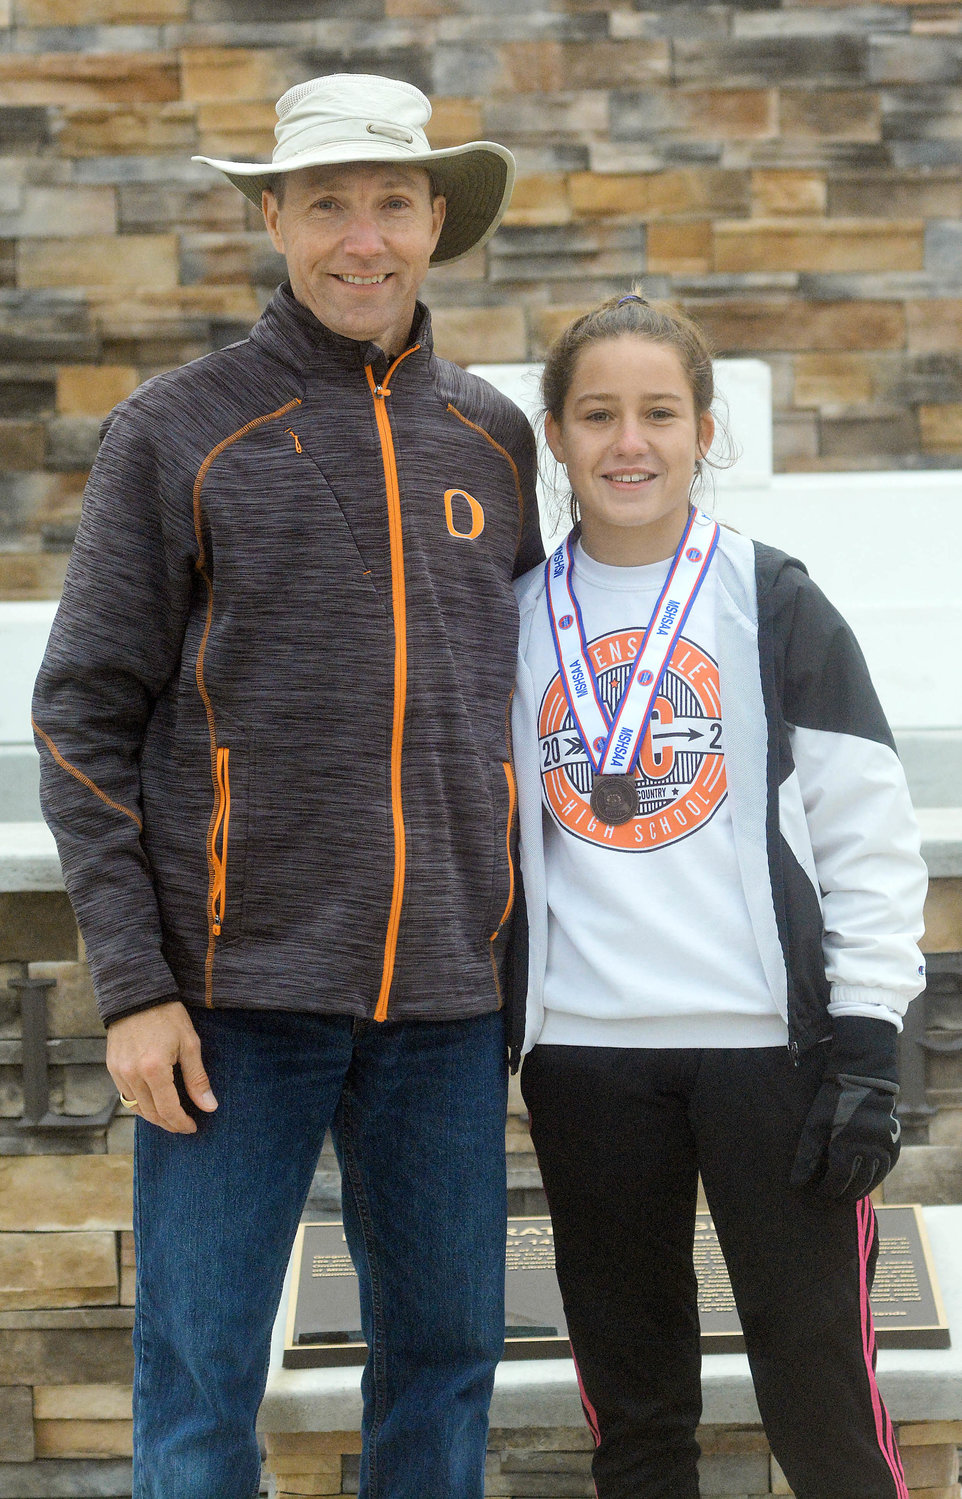 Coach Matt Candrl (left) poses with Limberg after presenting her with her 18th-place medal at Gans Creek.